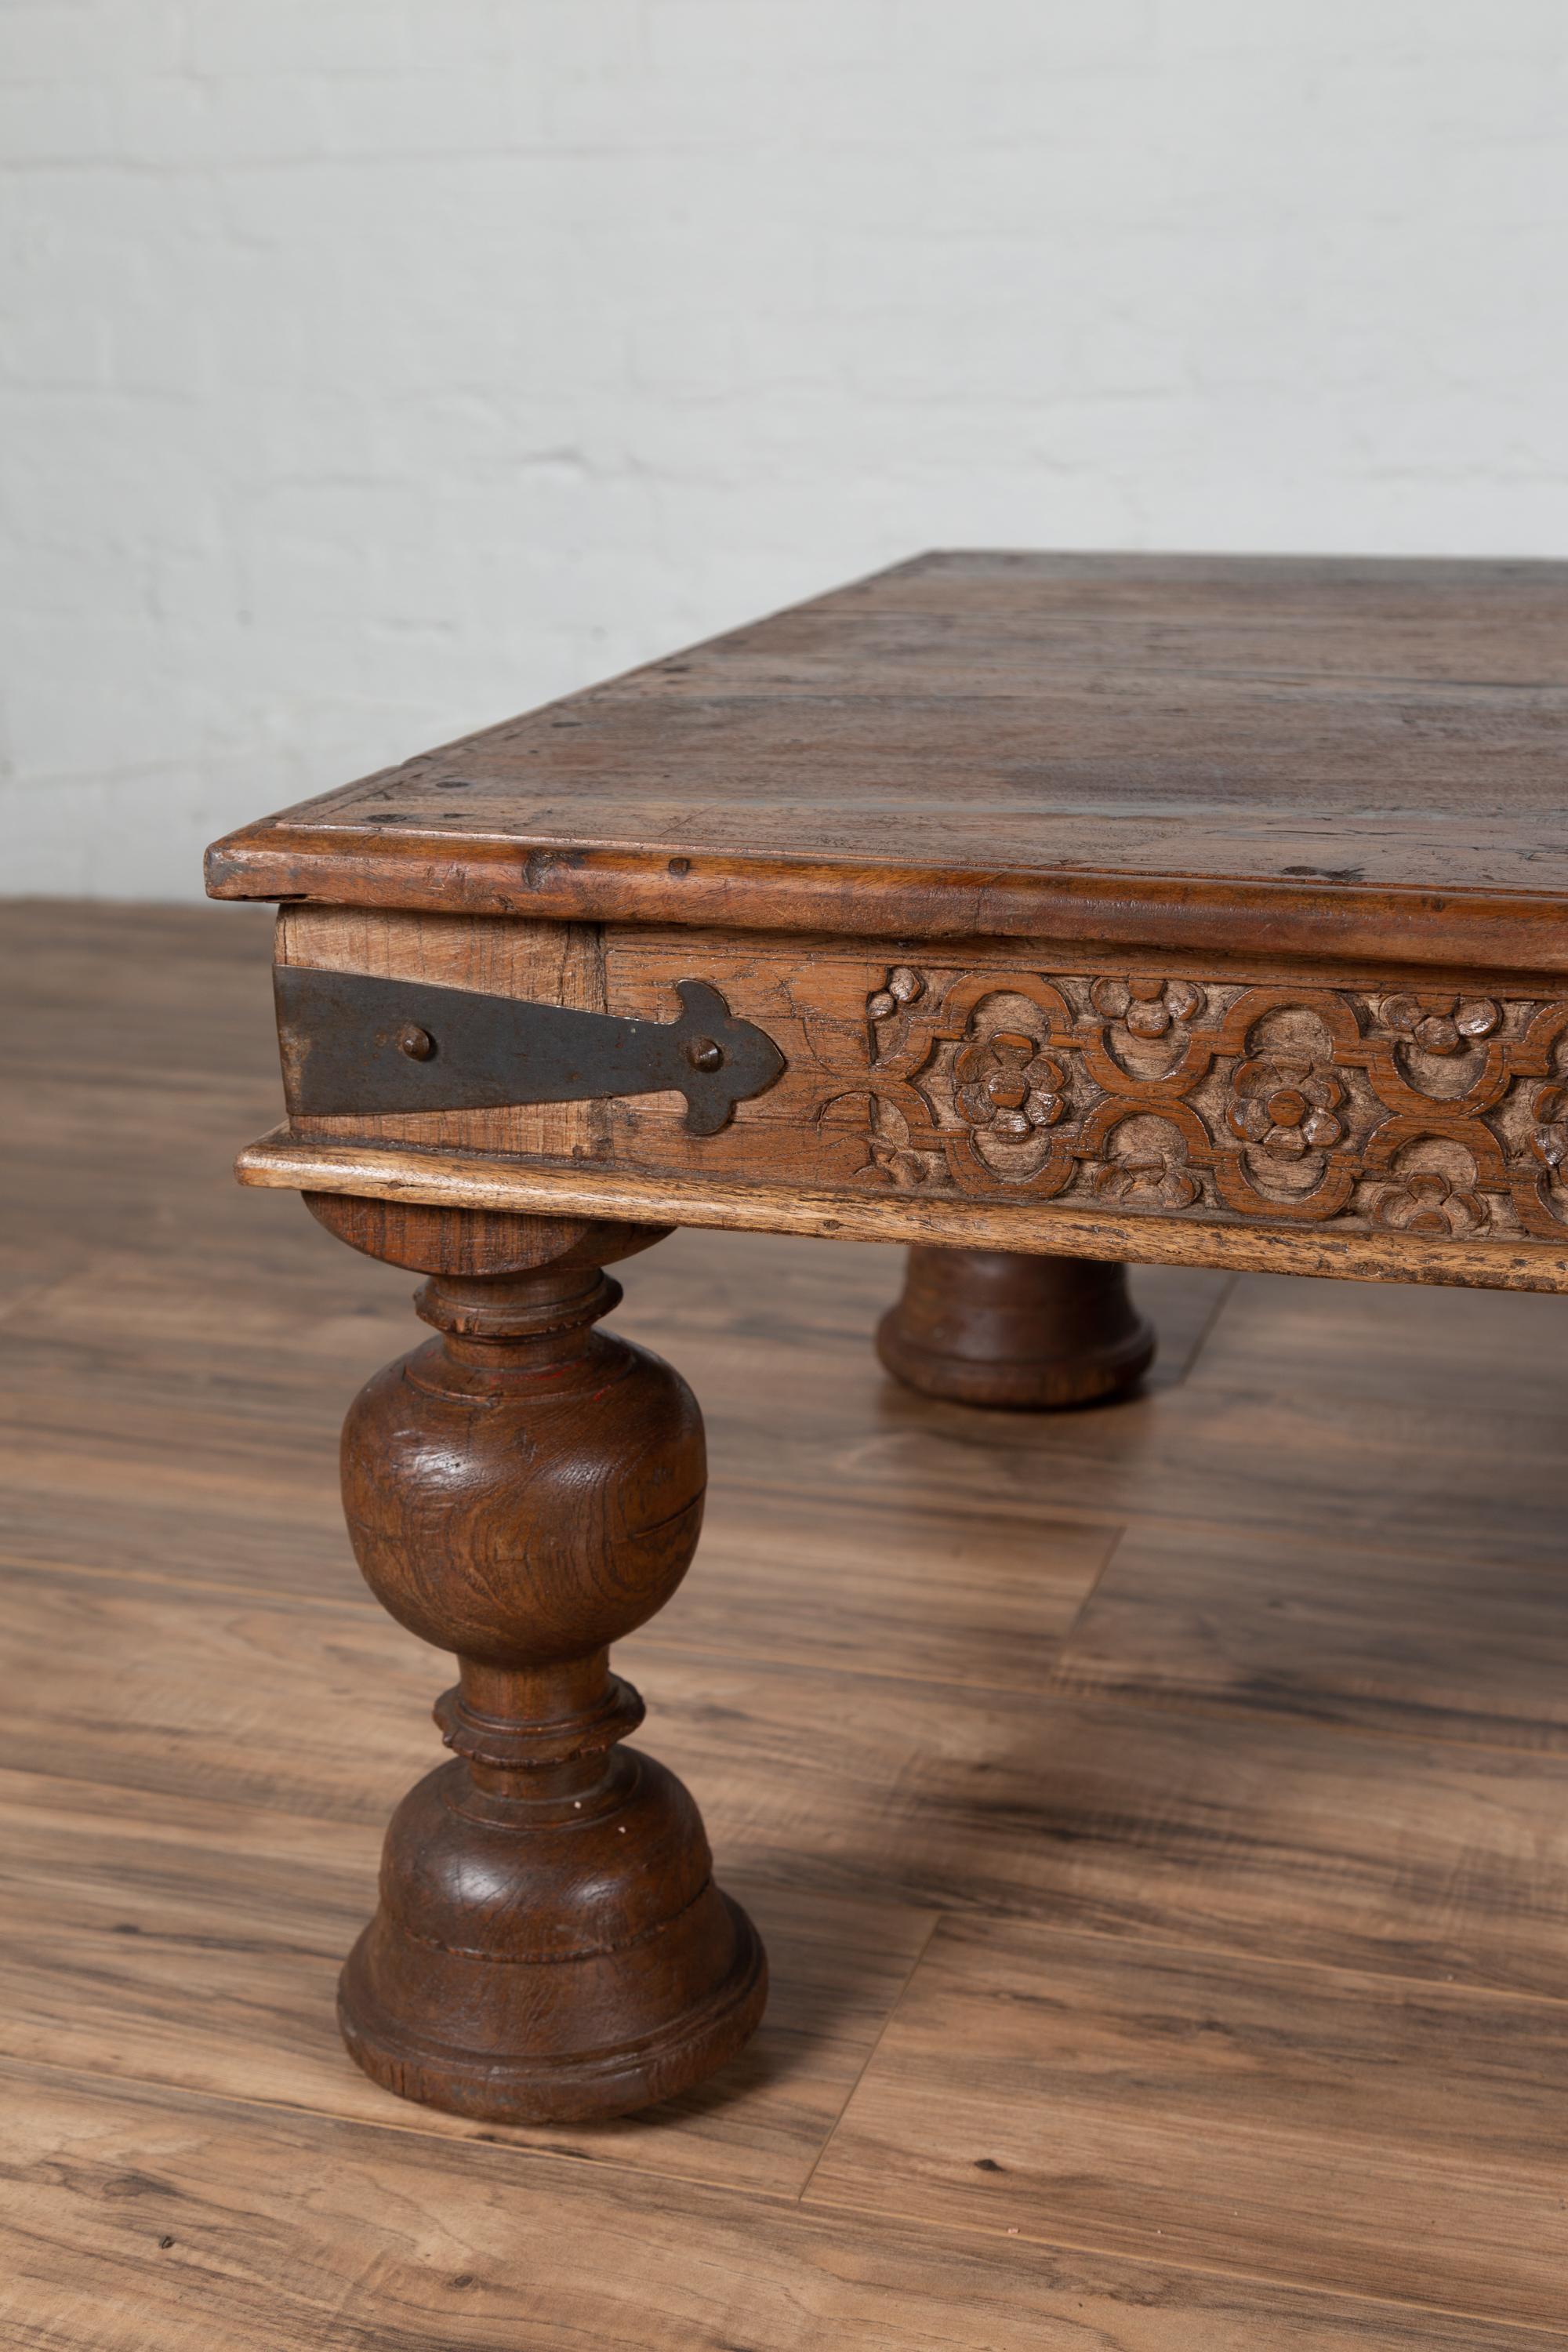 Chinese Antique Javanese Teak Wood Coffee Table with Hand Carved Floral Themed Apron